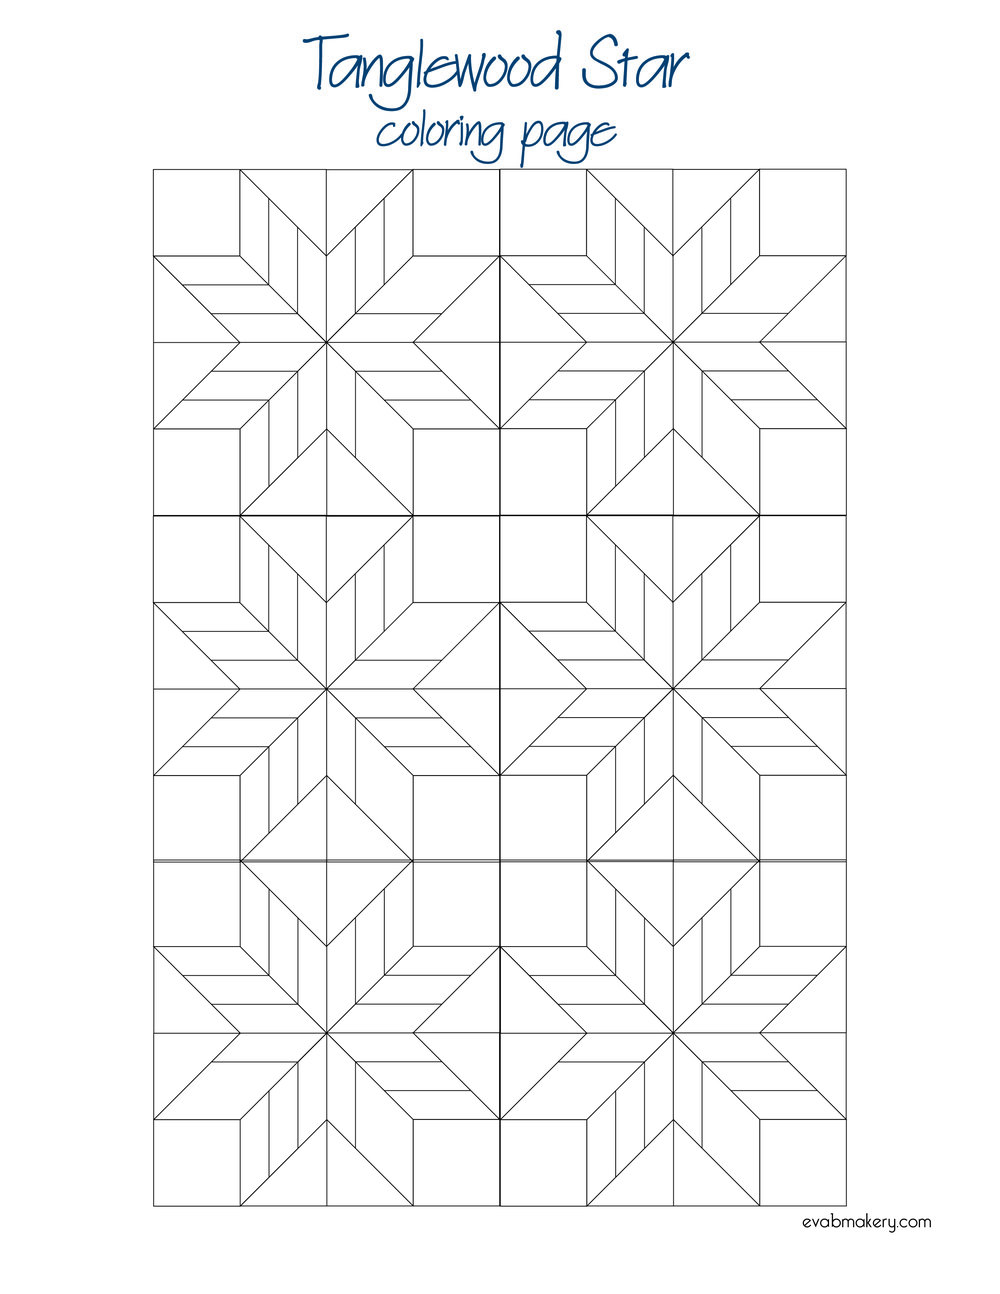 Tanglewood star quilt coloring page â eva blakes makery